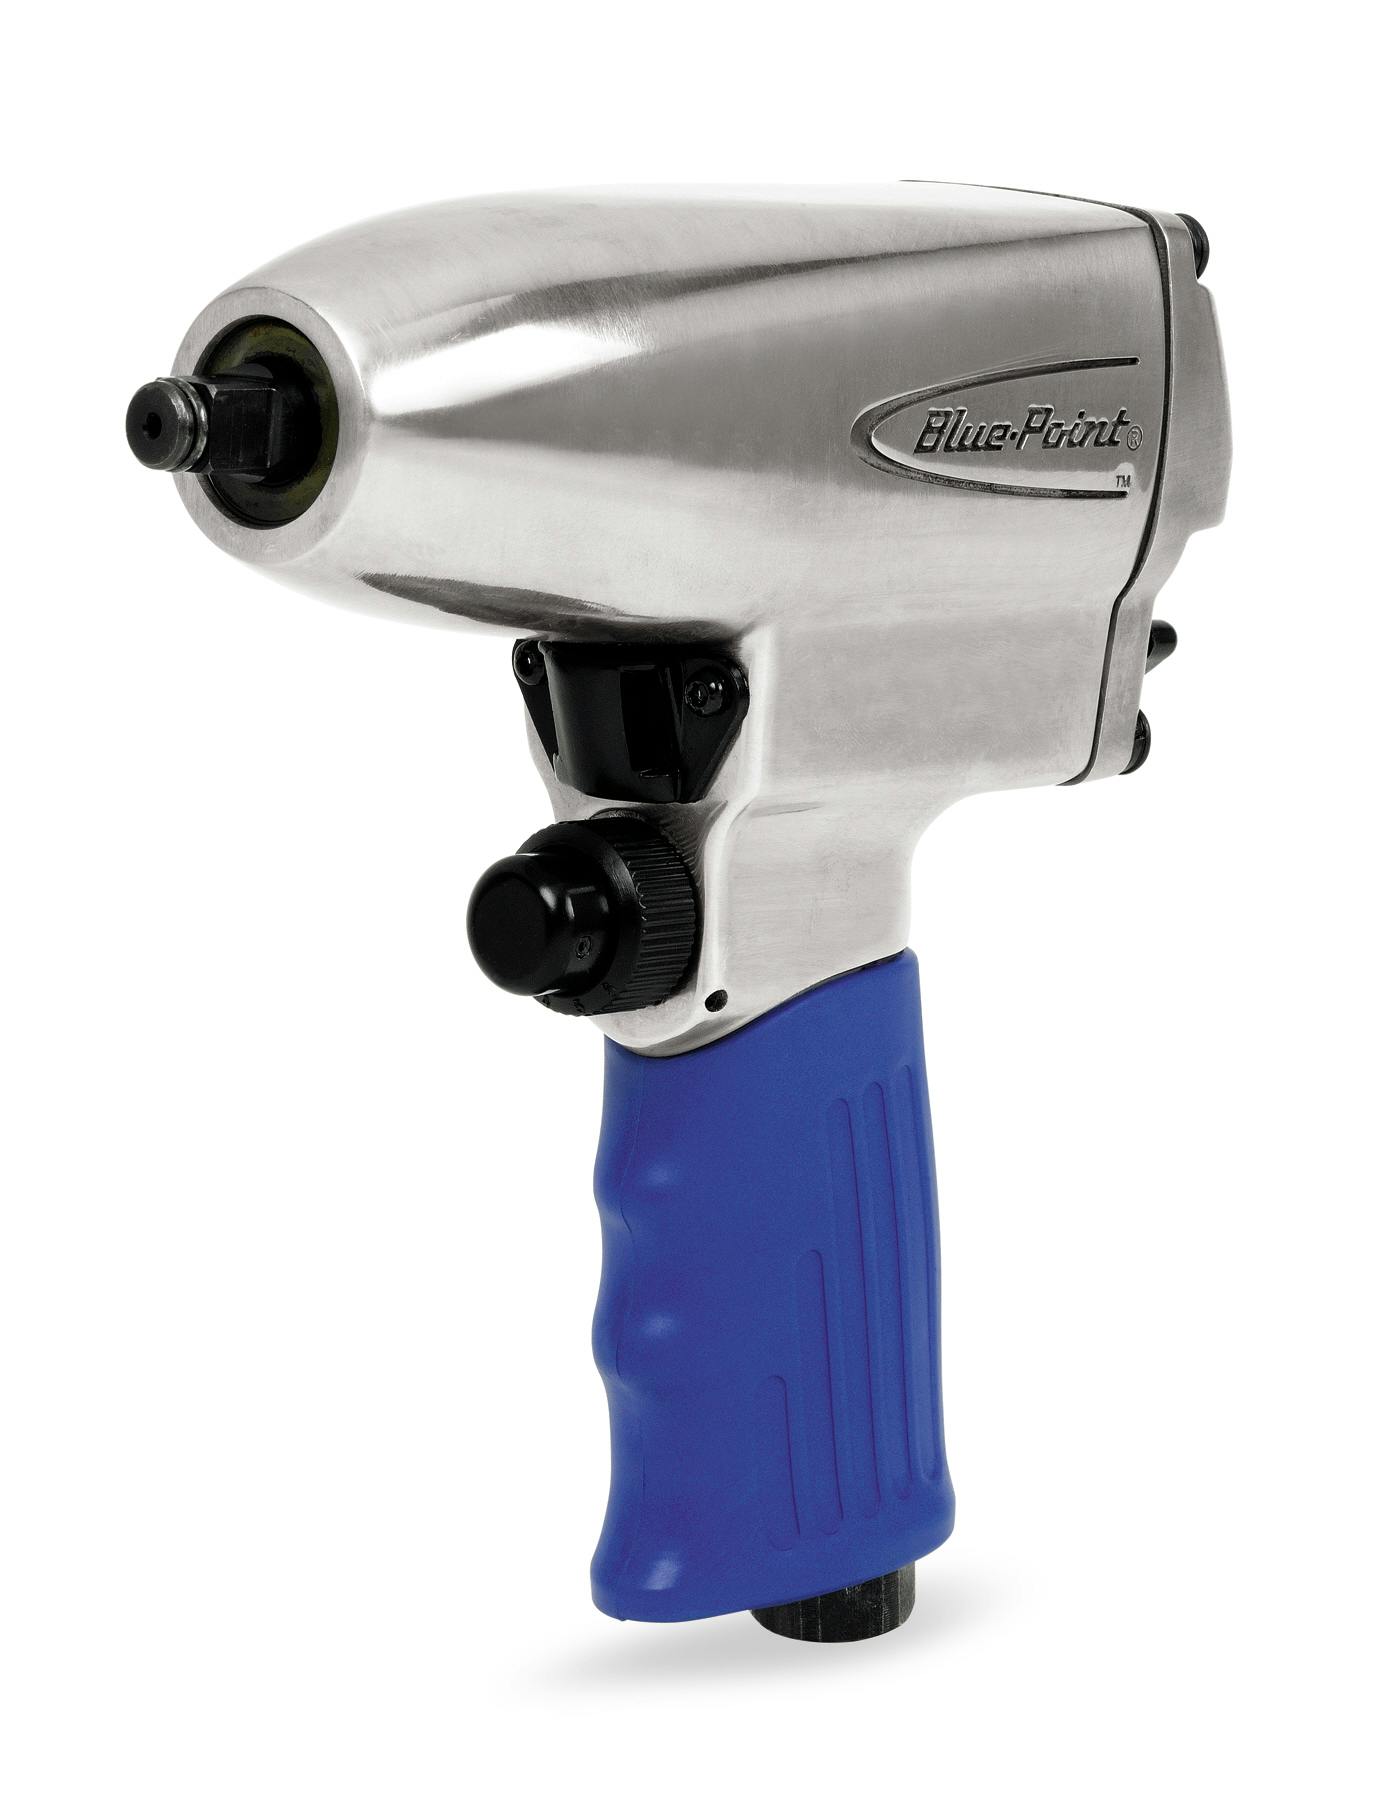 Blue point AT321 3'8" Drive Air Impact Wrench Gun Protective Boot 